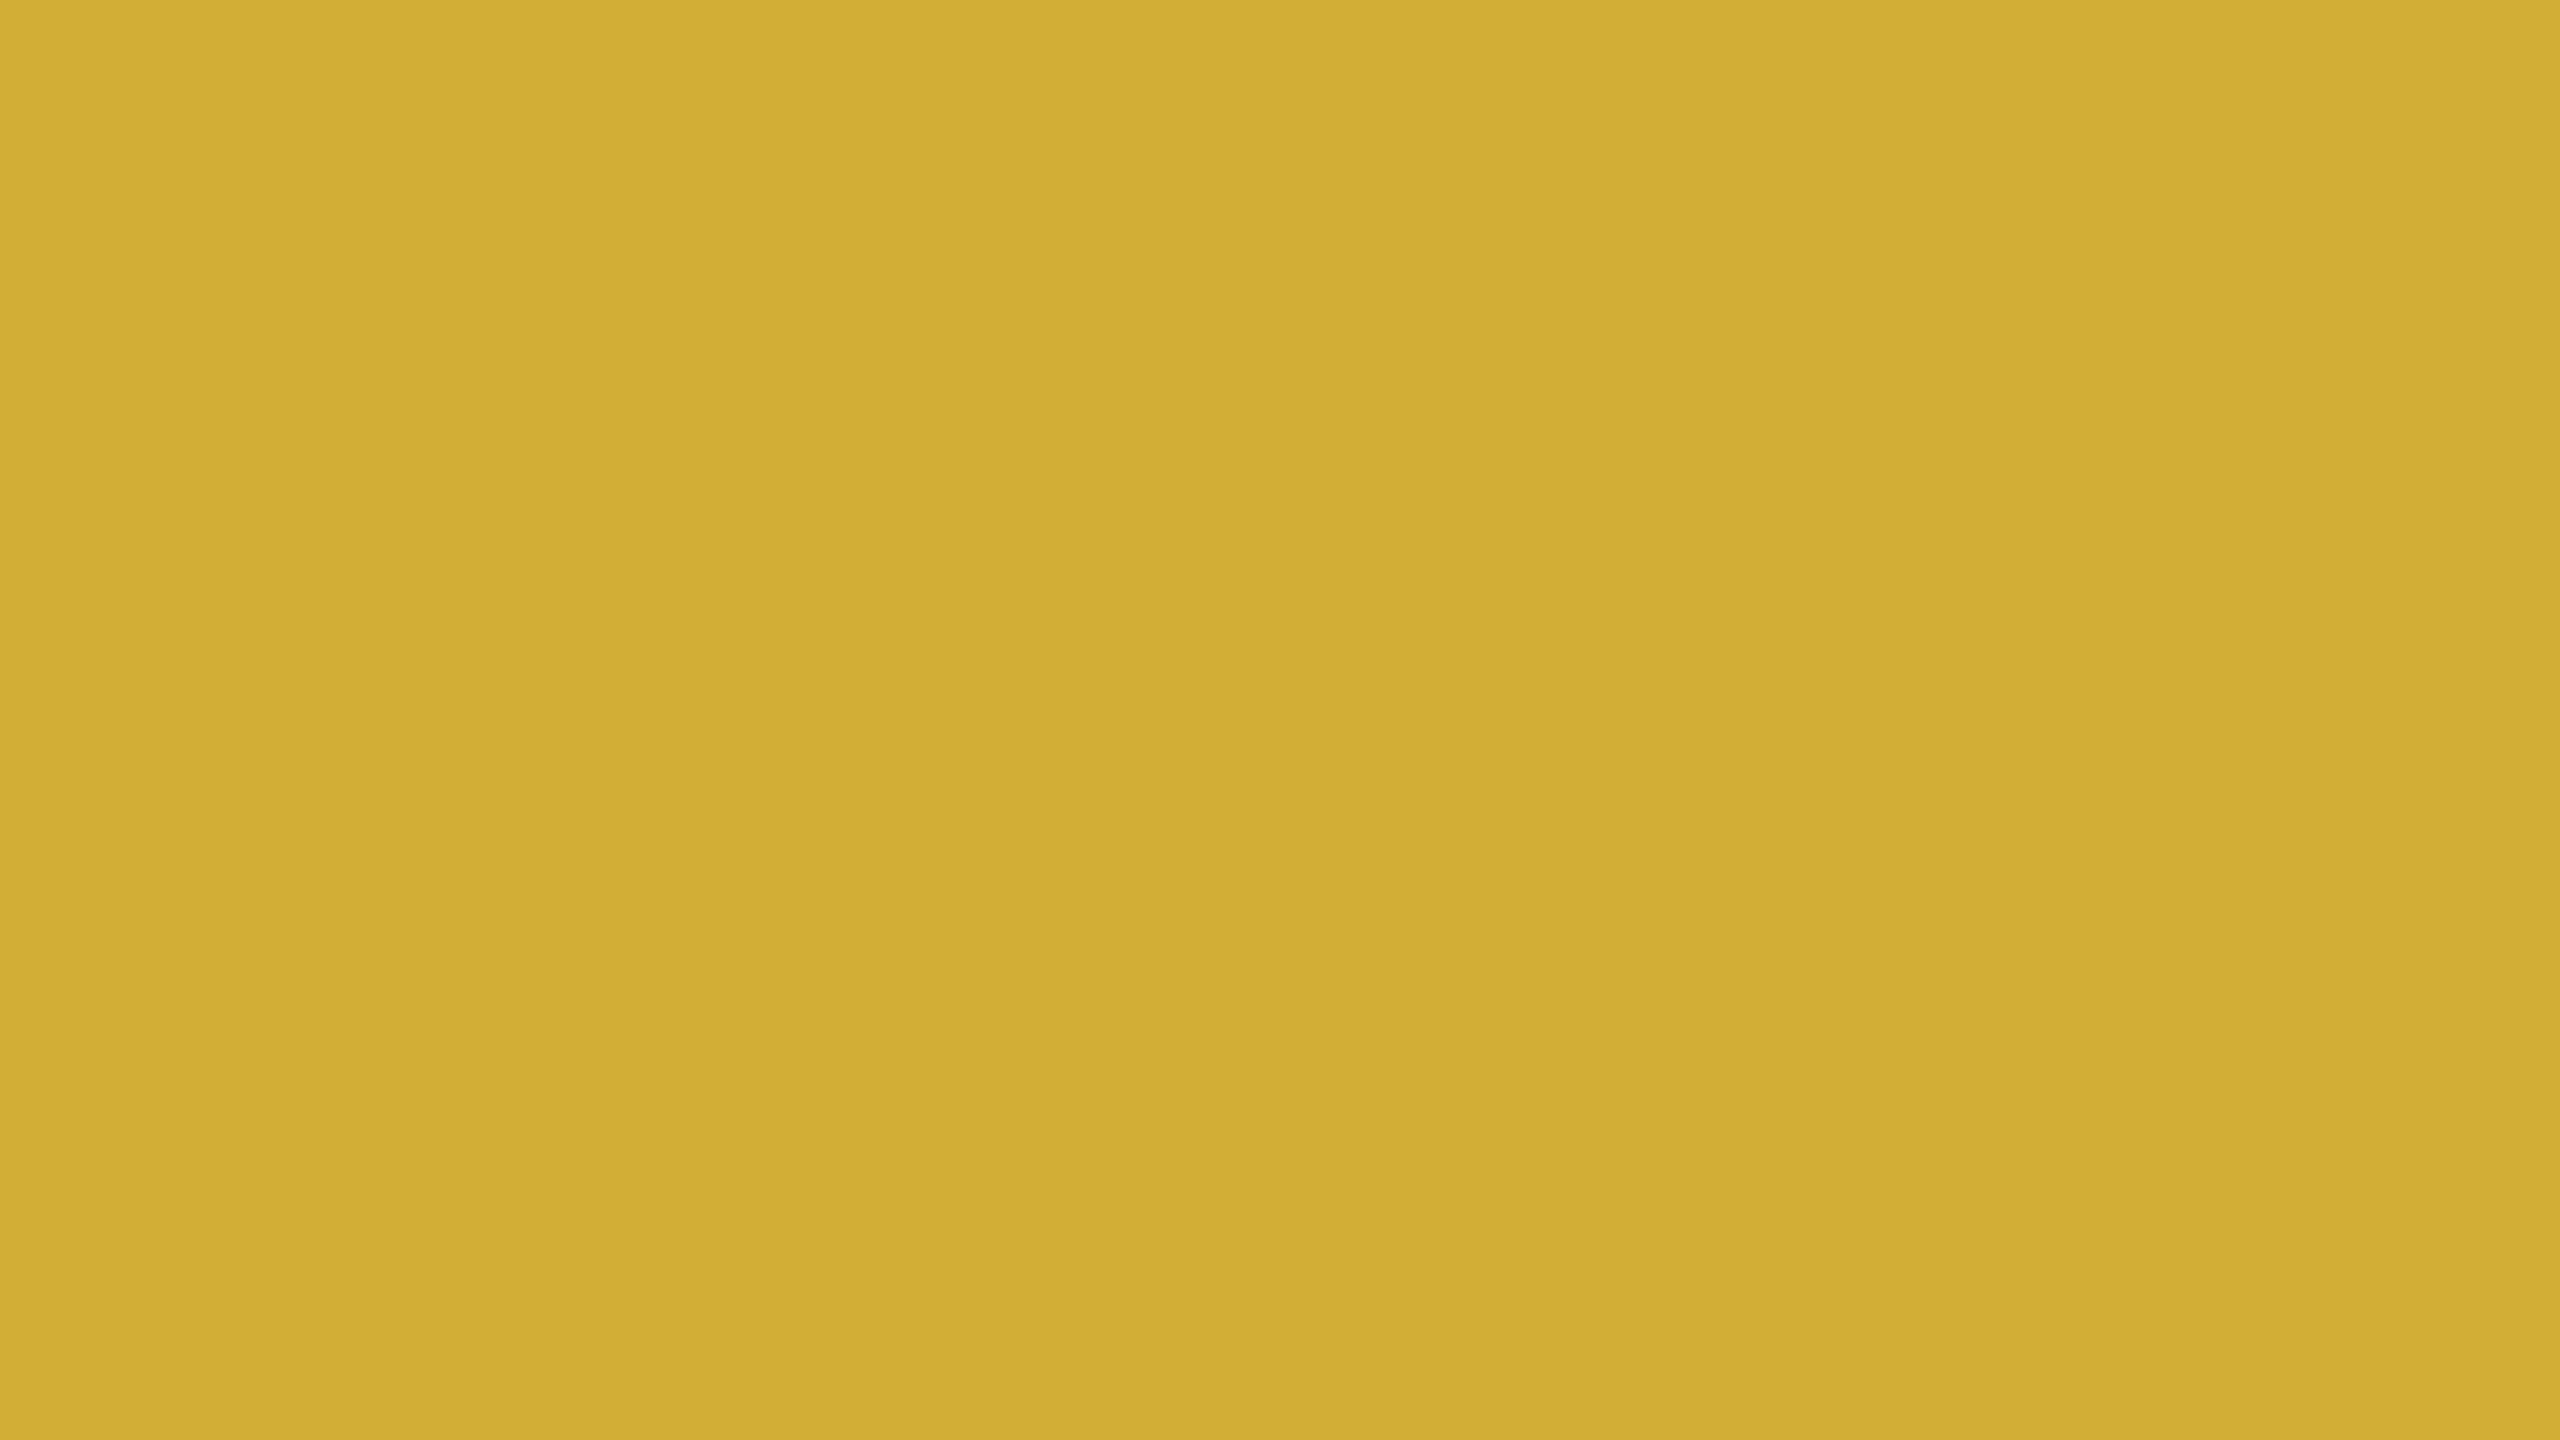 2560x1440 Gold Metallic Solid Color Background